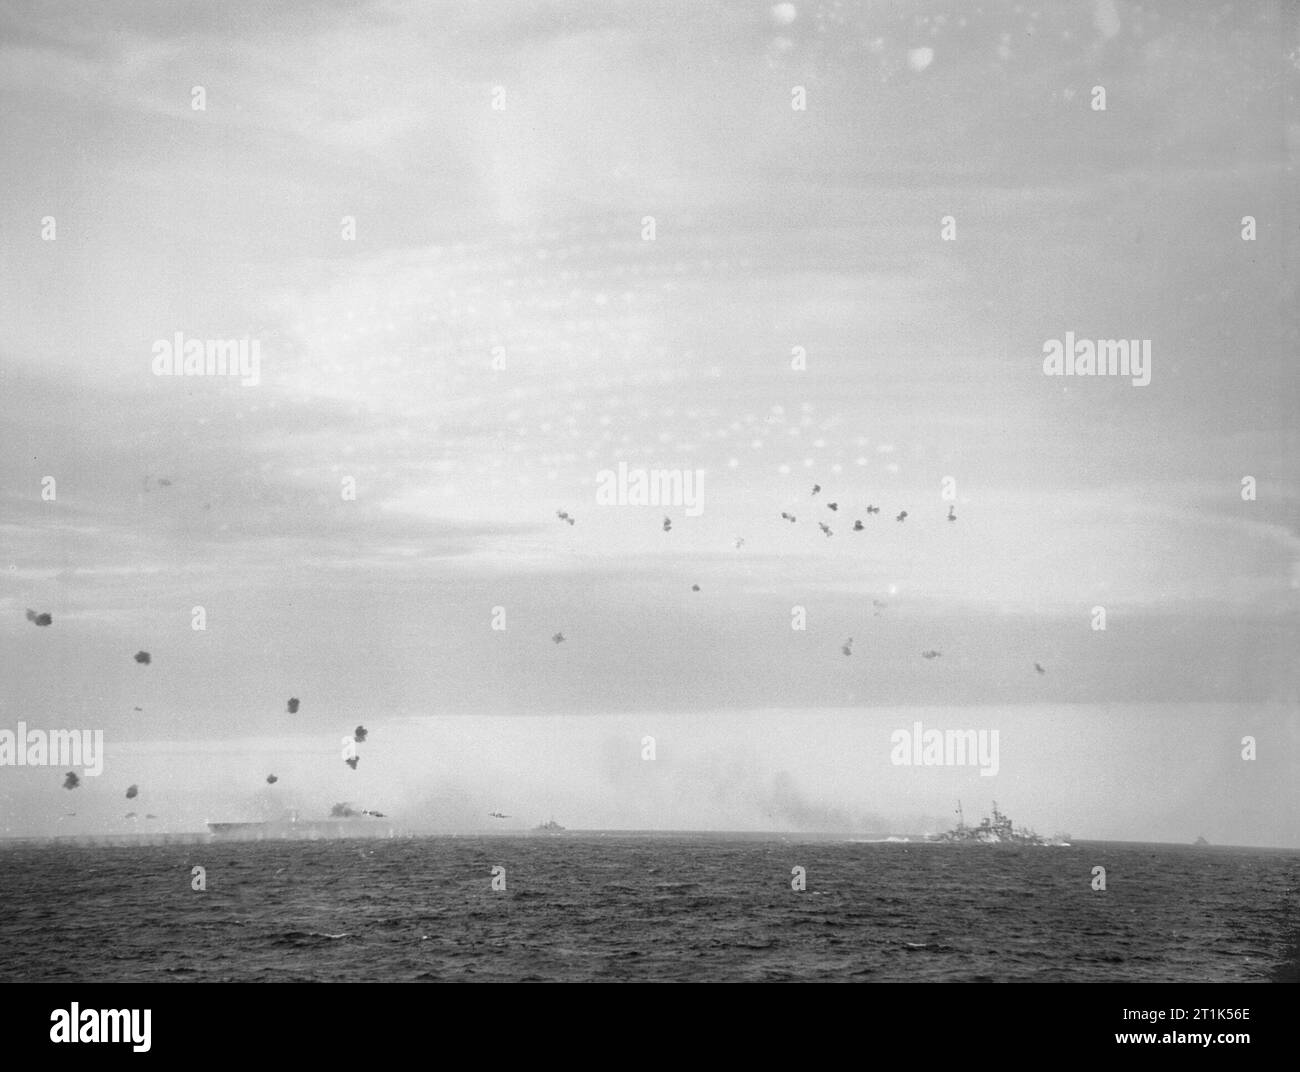 HMS ARK ROYAL and HMS RENOWN firing at Italian torpedo bombers during an attack on a British convoy off Sicily, April 1941. In the distance HMS ARK ROYAL and HMS RENOWN are firing at two Italian torpedo bombers during an attack on a British convoy which was escorted by warships in the Sicilian channel. One is just over the bows of HMS ARK ROYAL and the other is nearer the centre of the picture. Stock Photo